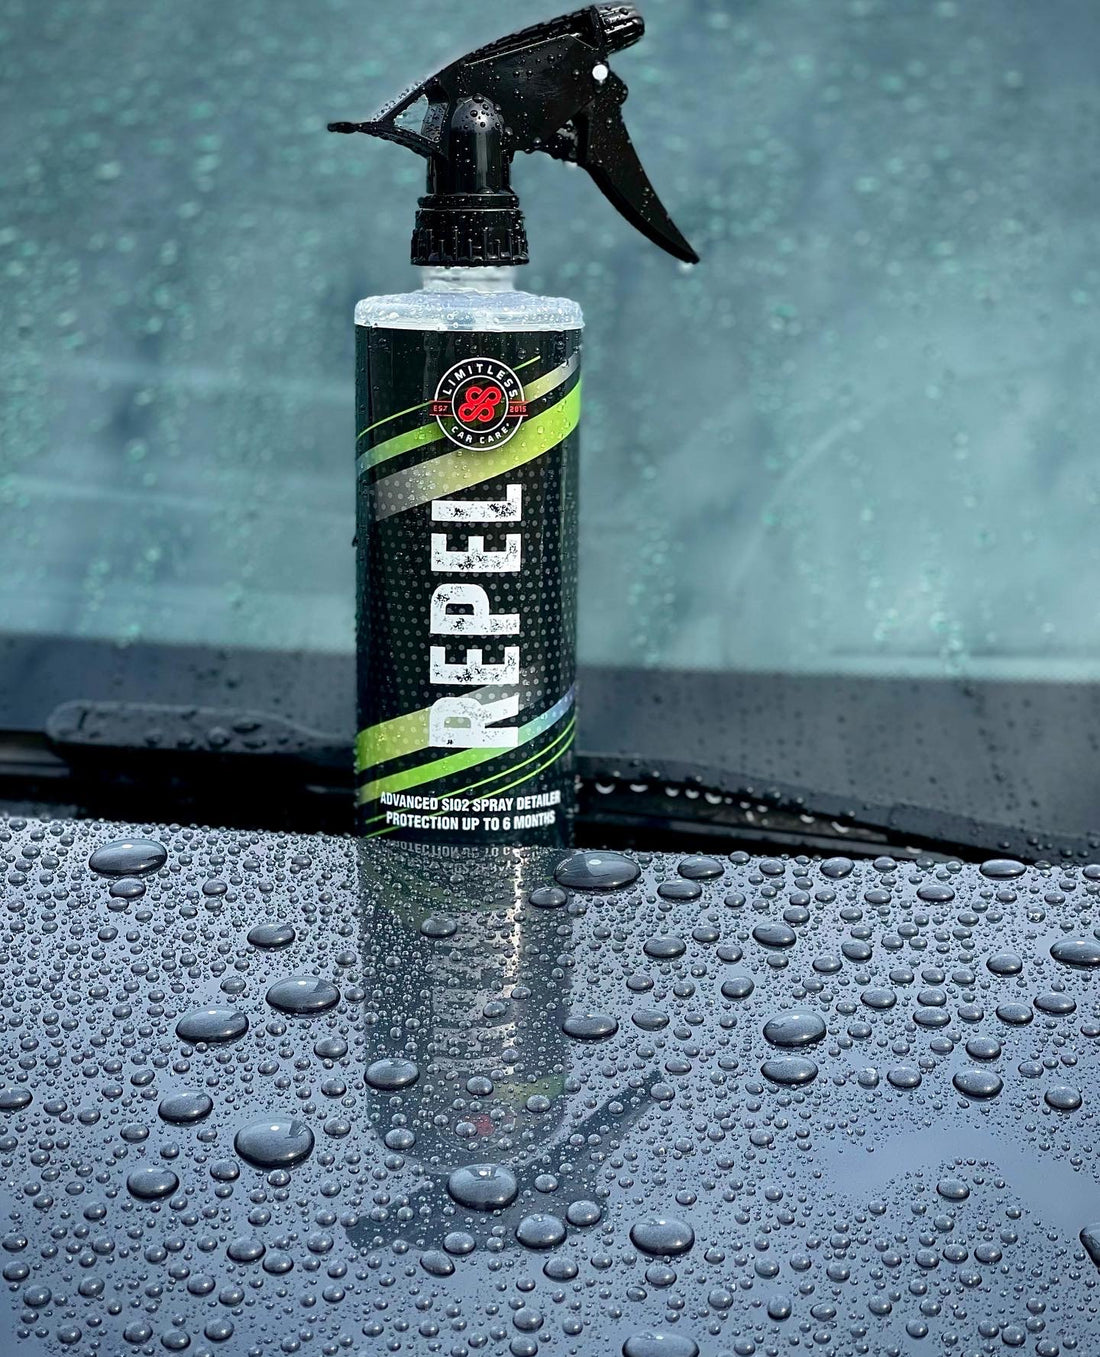 Limitless Car Care Repel Si02 Spray Detailer 6 Months Protection - Detailing Connect